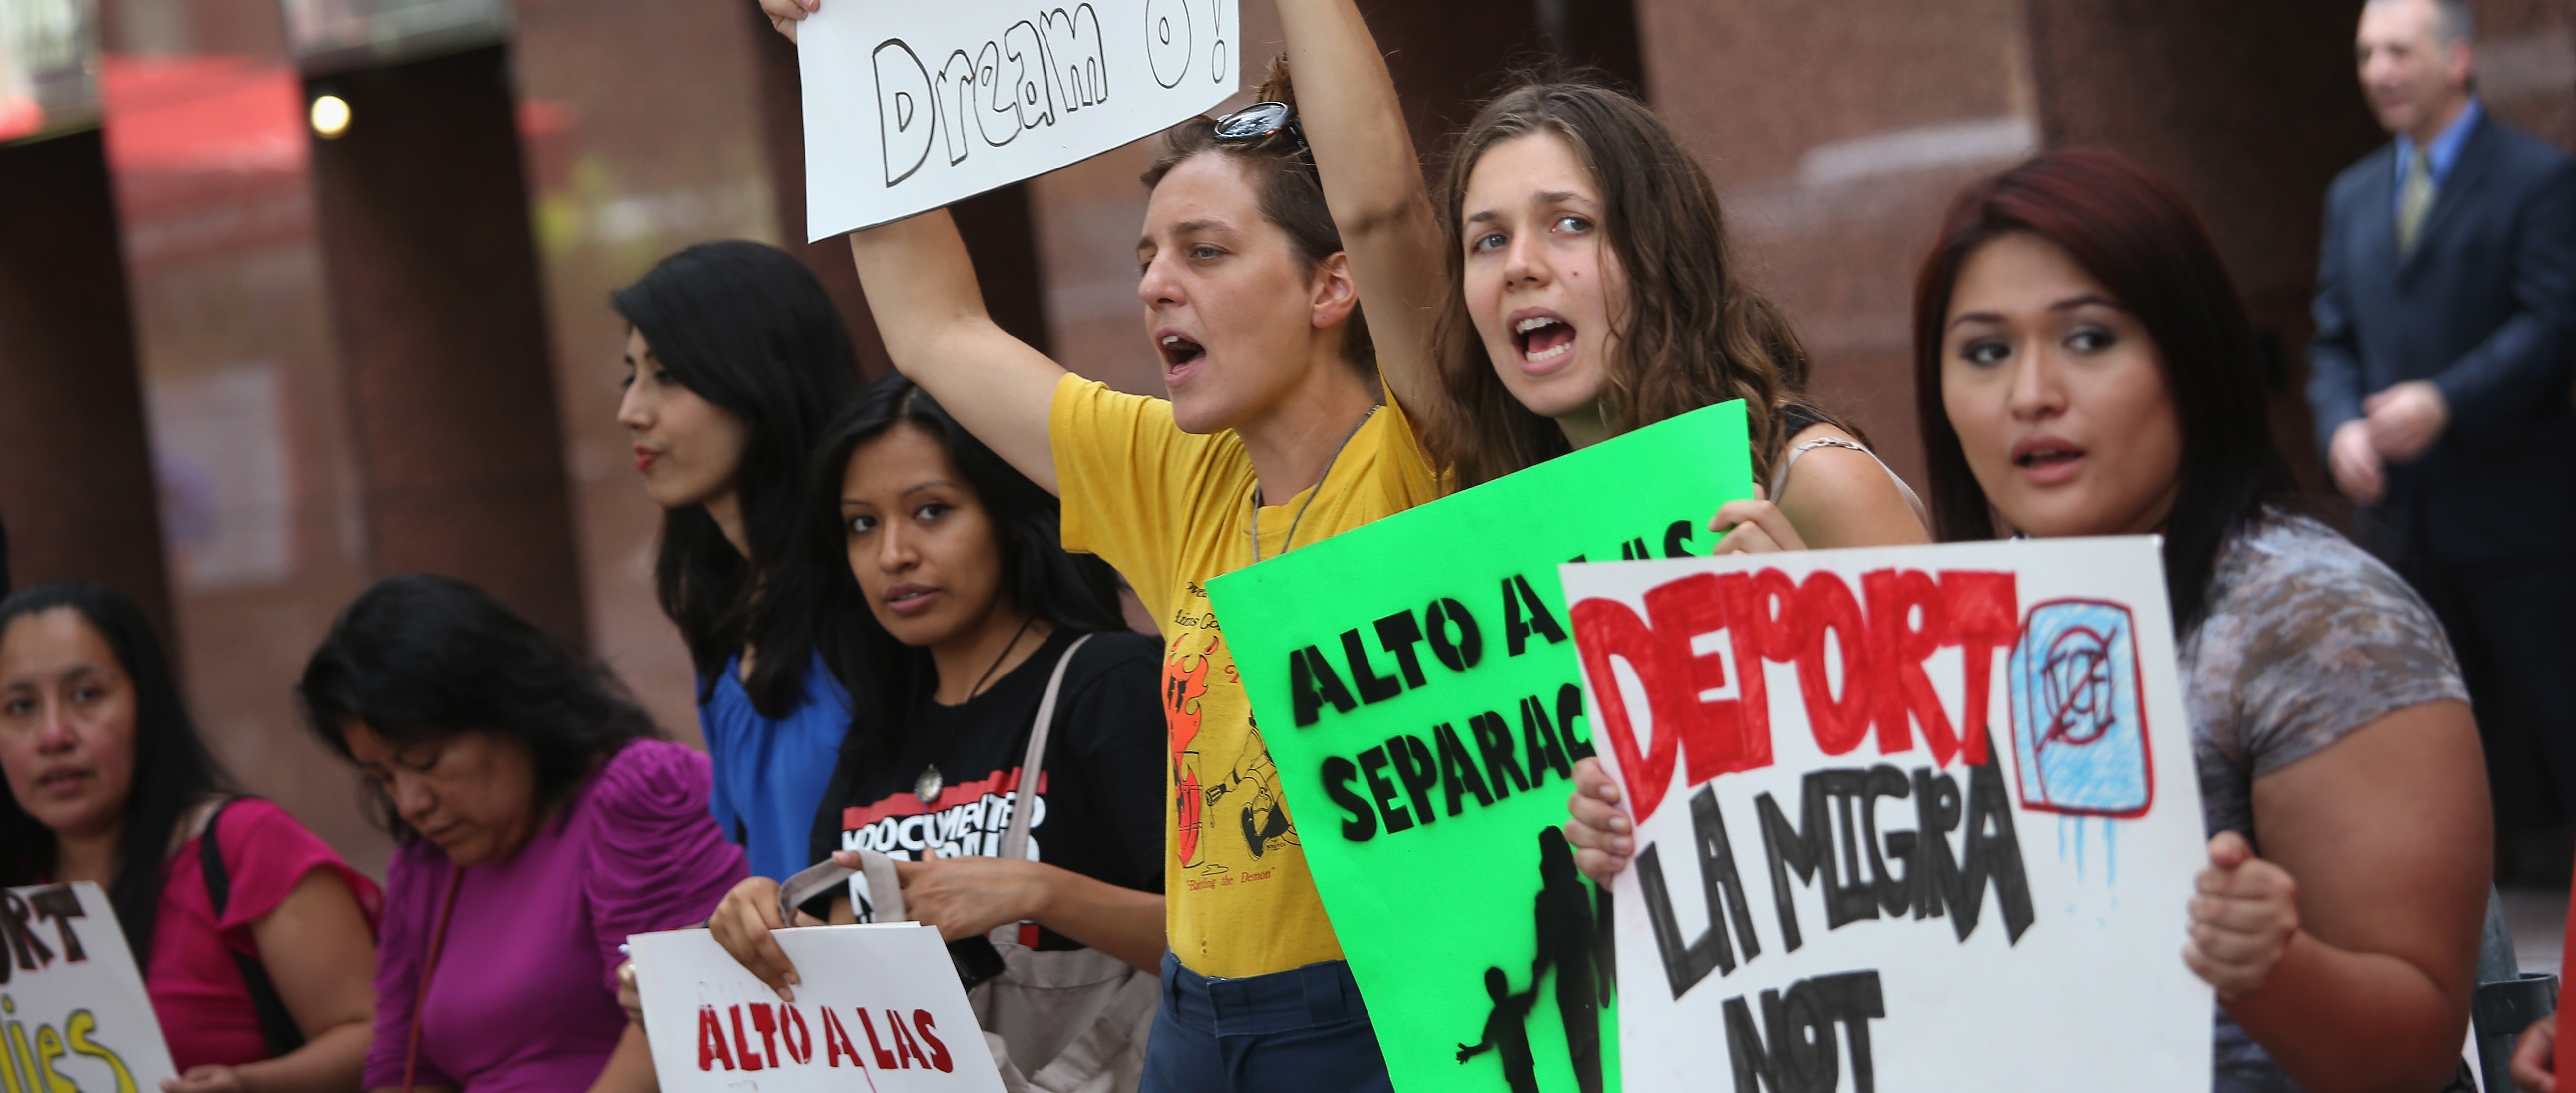 Undocumented Immigrant Activists Elicit Divisions Among Advocates Fox News pic